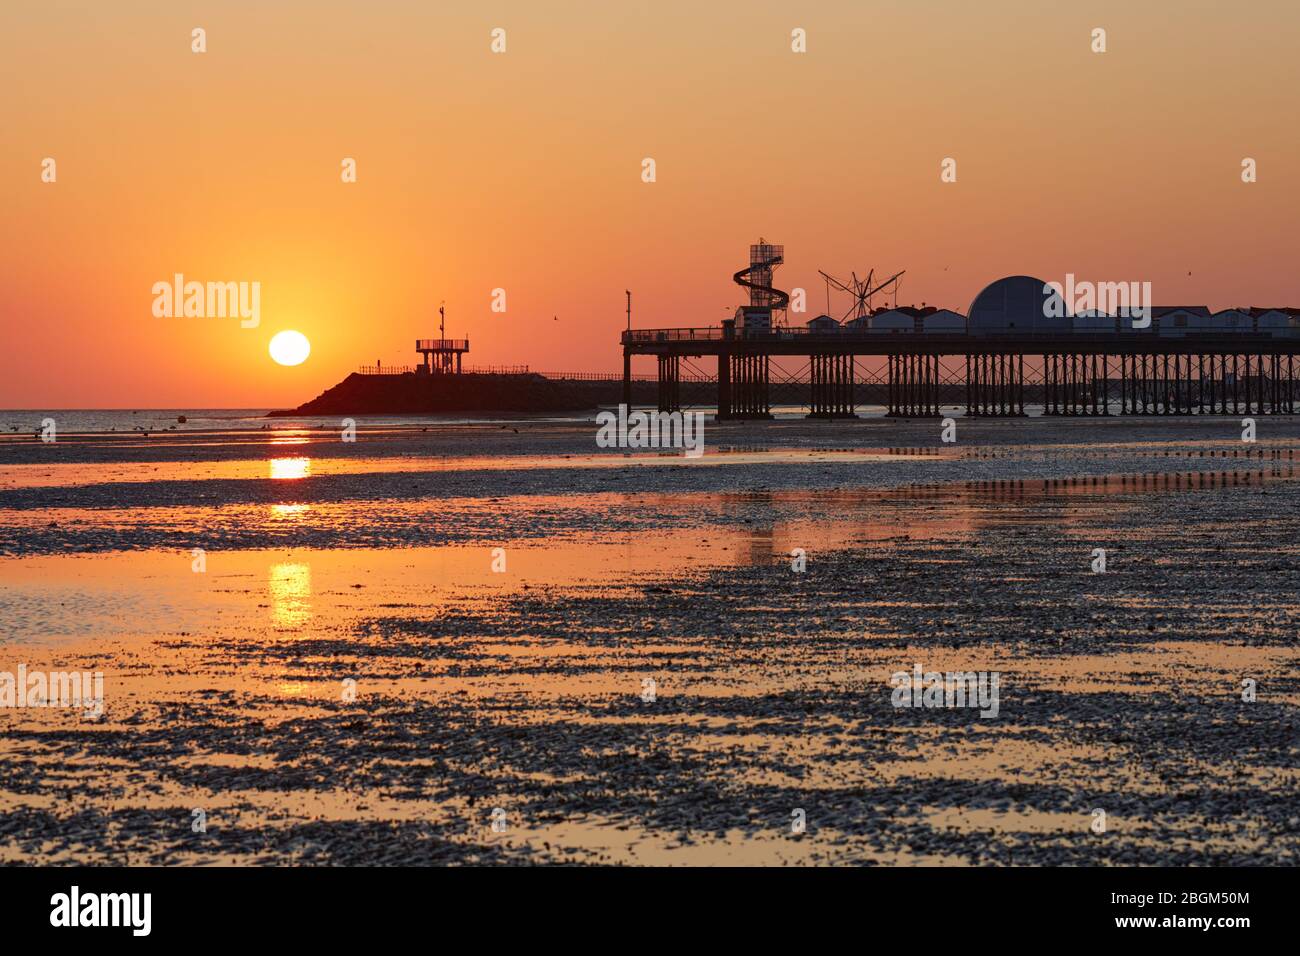 Herne Bay, Kent, UK. 22nd April 2020: UK Weather. Sunrise at Herne Bay pier in Kent on Earth Day as the weather continues to be warm and dry but with a chilly NE breeze. The COVID 19 lockdown continues as the pier and the helter skelter and other amusements are closed to the public. People are asked to stay away from the beaches again this weekend. Credit: Alan Payton/Alamy Live News Stock Photo